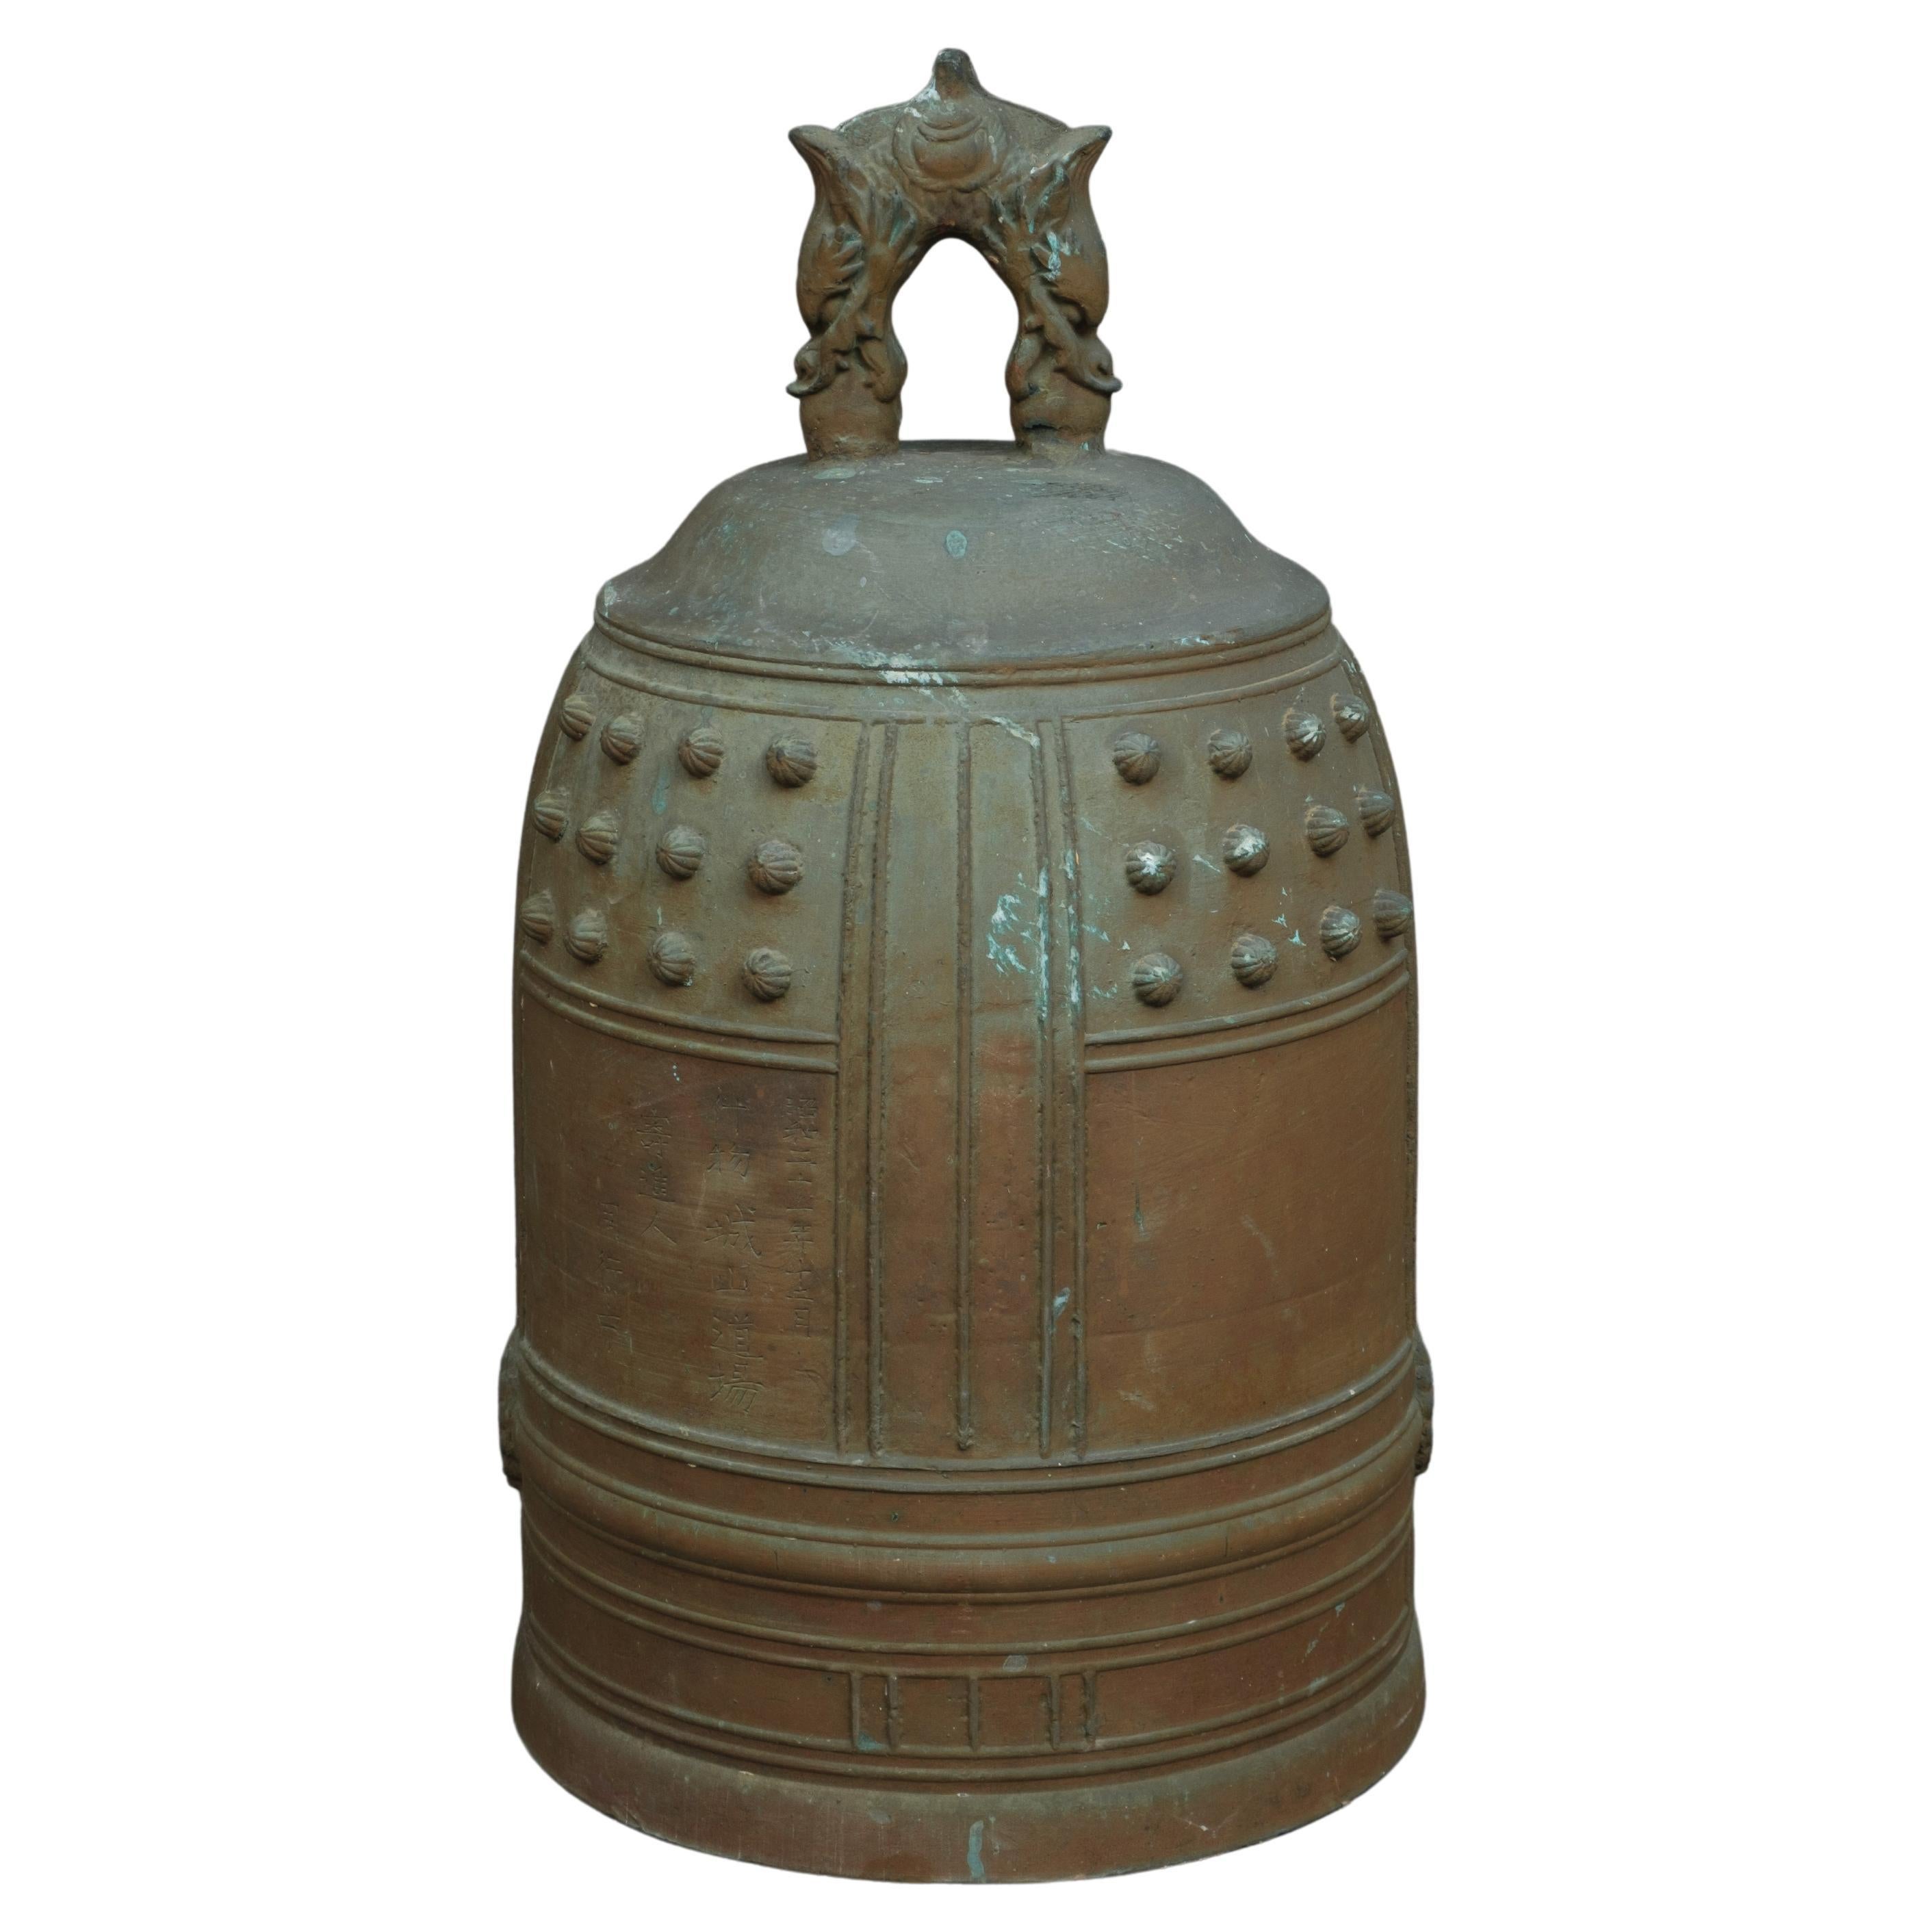 Heavy, Japanese bronze temple bell 梵鐘 (bonshô) of traditional shape For Sale